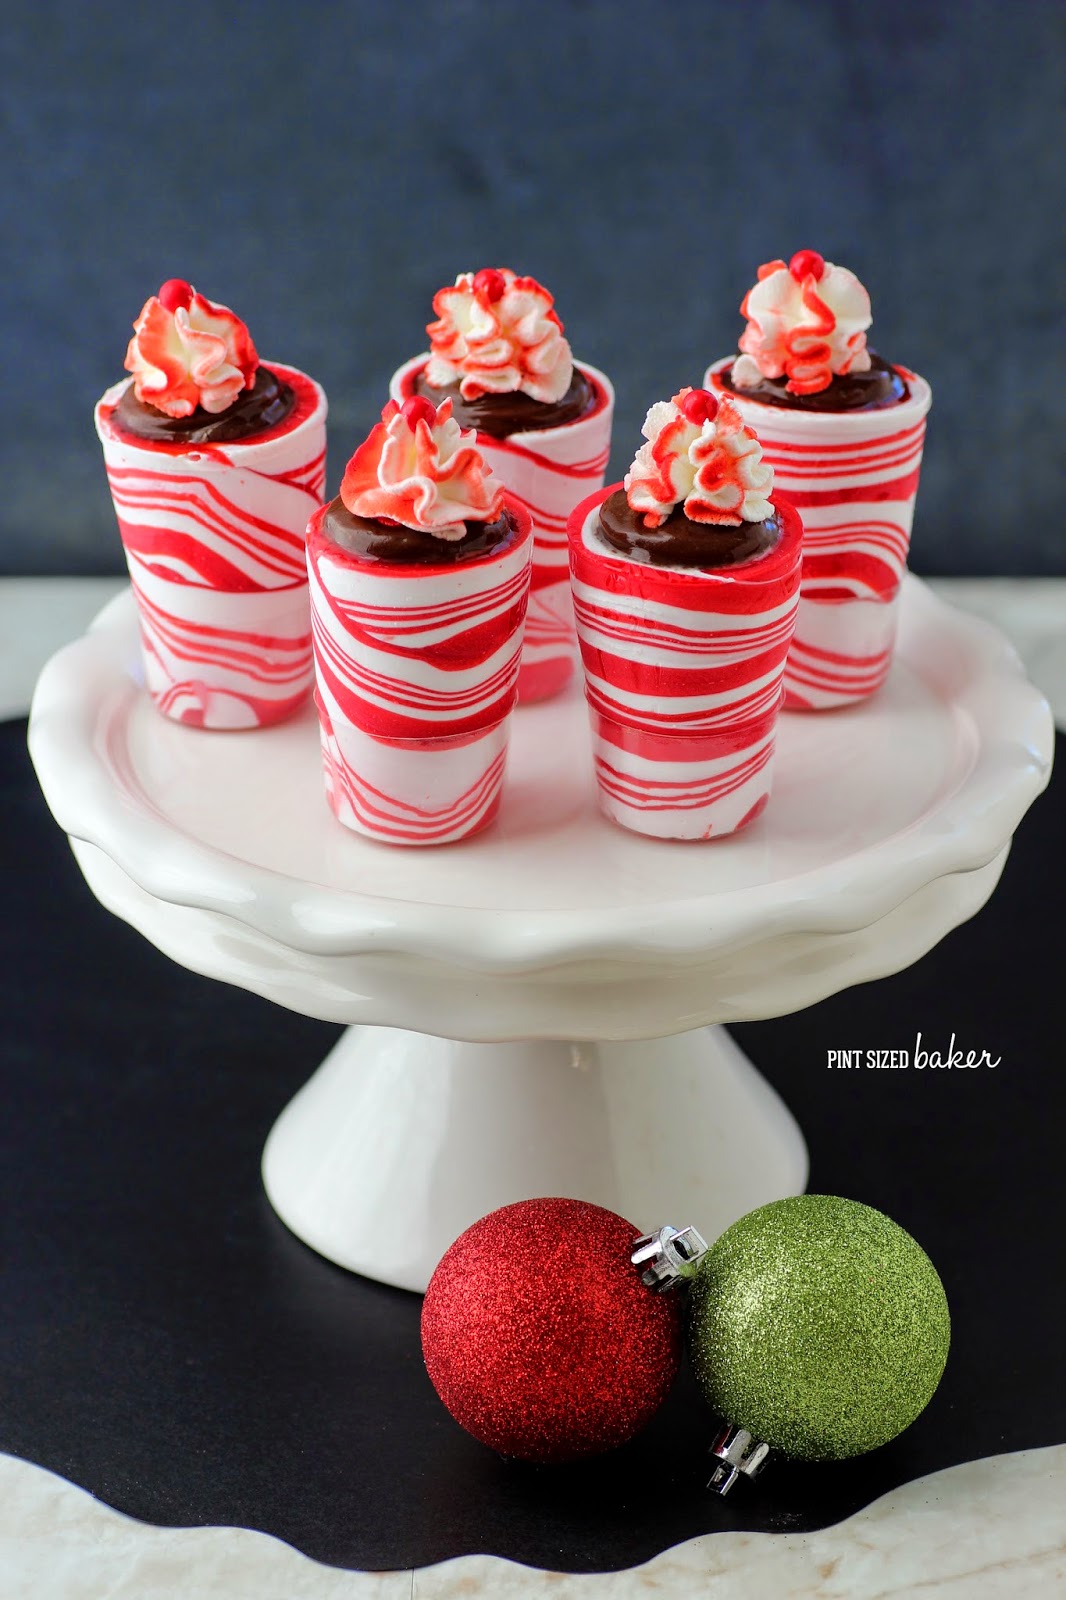 These Chocolate Pudding Shooters taste so yummy! I love the way the peppermint shooters taste with chocolate pudding! They are fun to serve at a party.